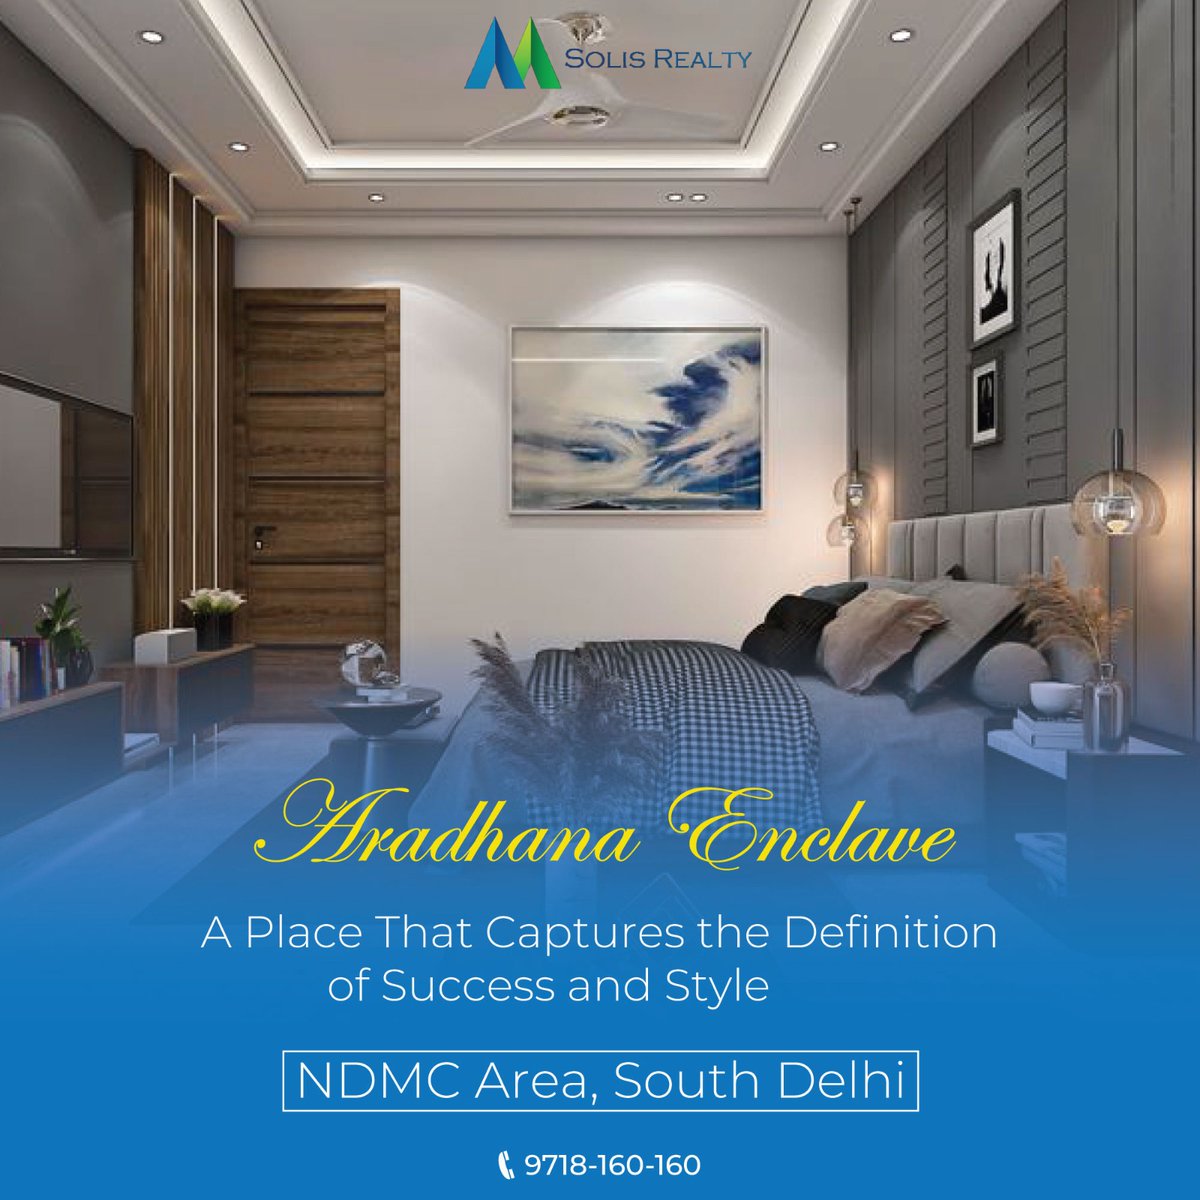 #AradhanaEnclave - #NDMCArea, #SouthDelhi

A Place That Captures the Definition of #Success and #Style         
Call: 9643160160 #SolisRealty

#homes #newhomes #luxuryhomes #flats #furnishedflats #semfurnishedflats #residentialproperty #propertybroker #realestateagent